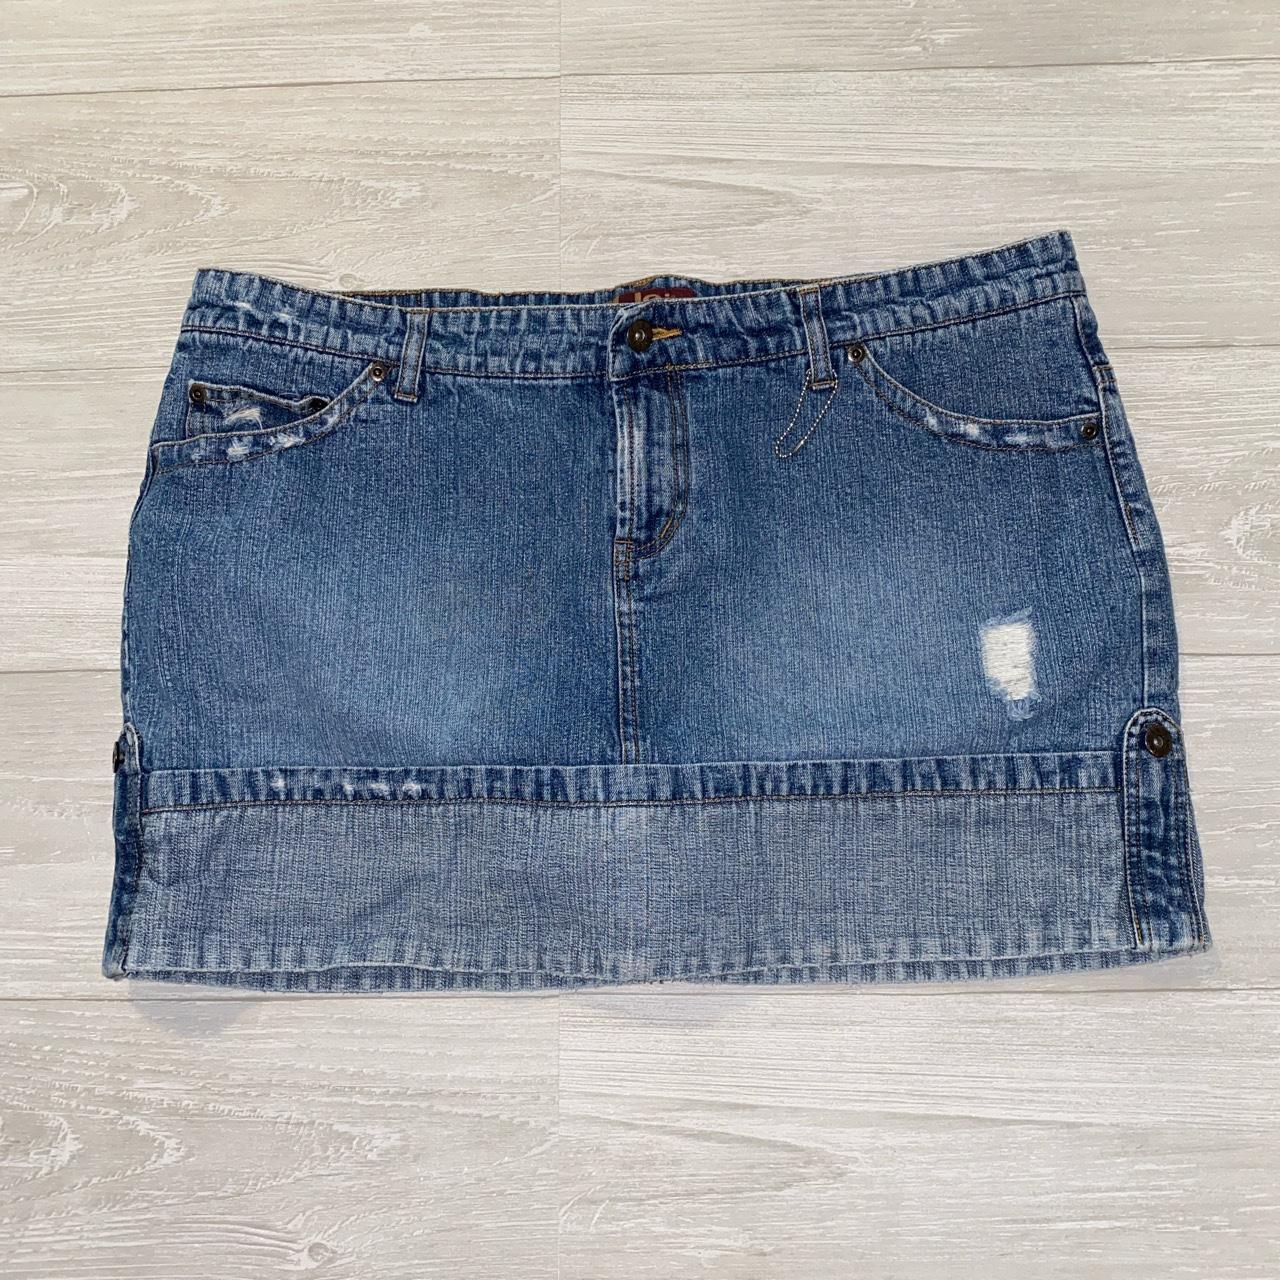 early 2000’s mini skirt 💕 has built in shorts by the... - Depop